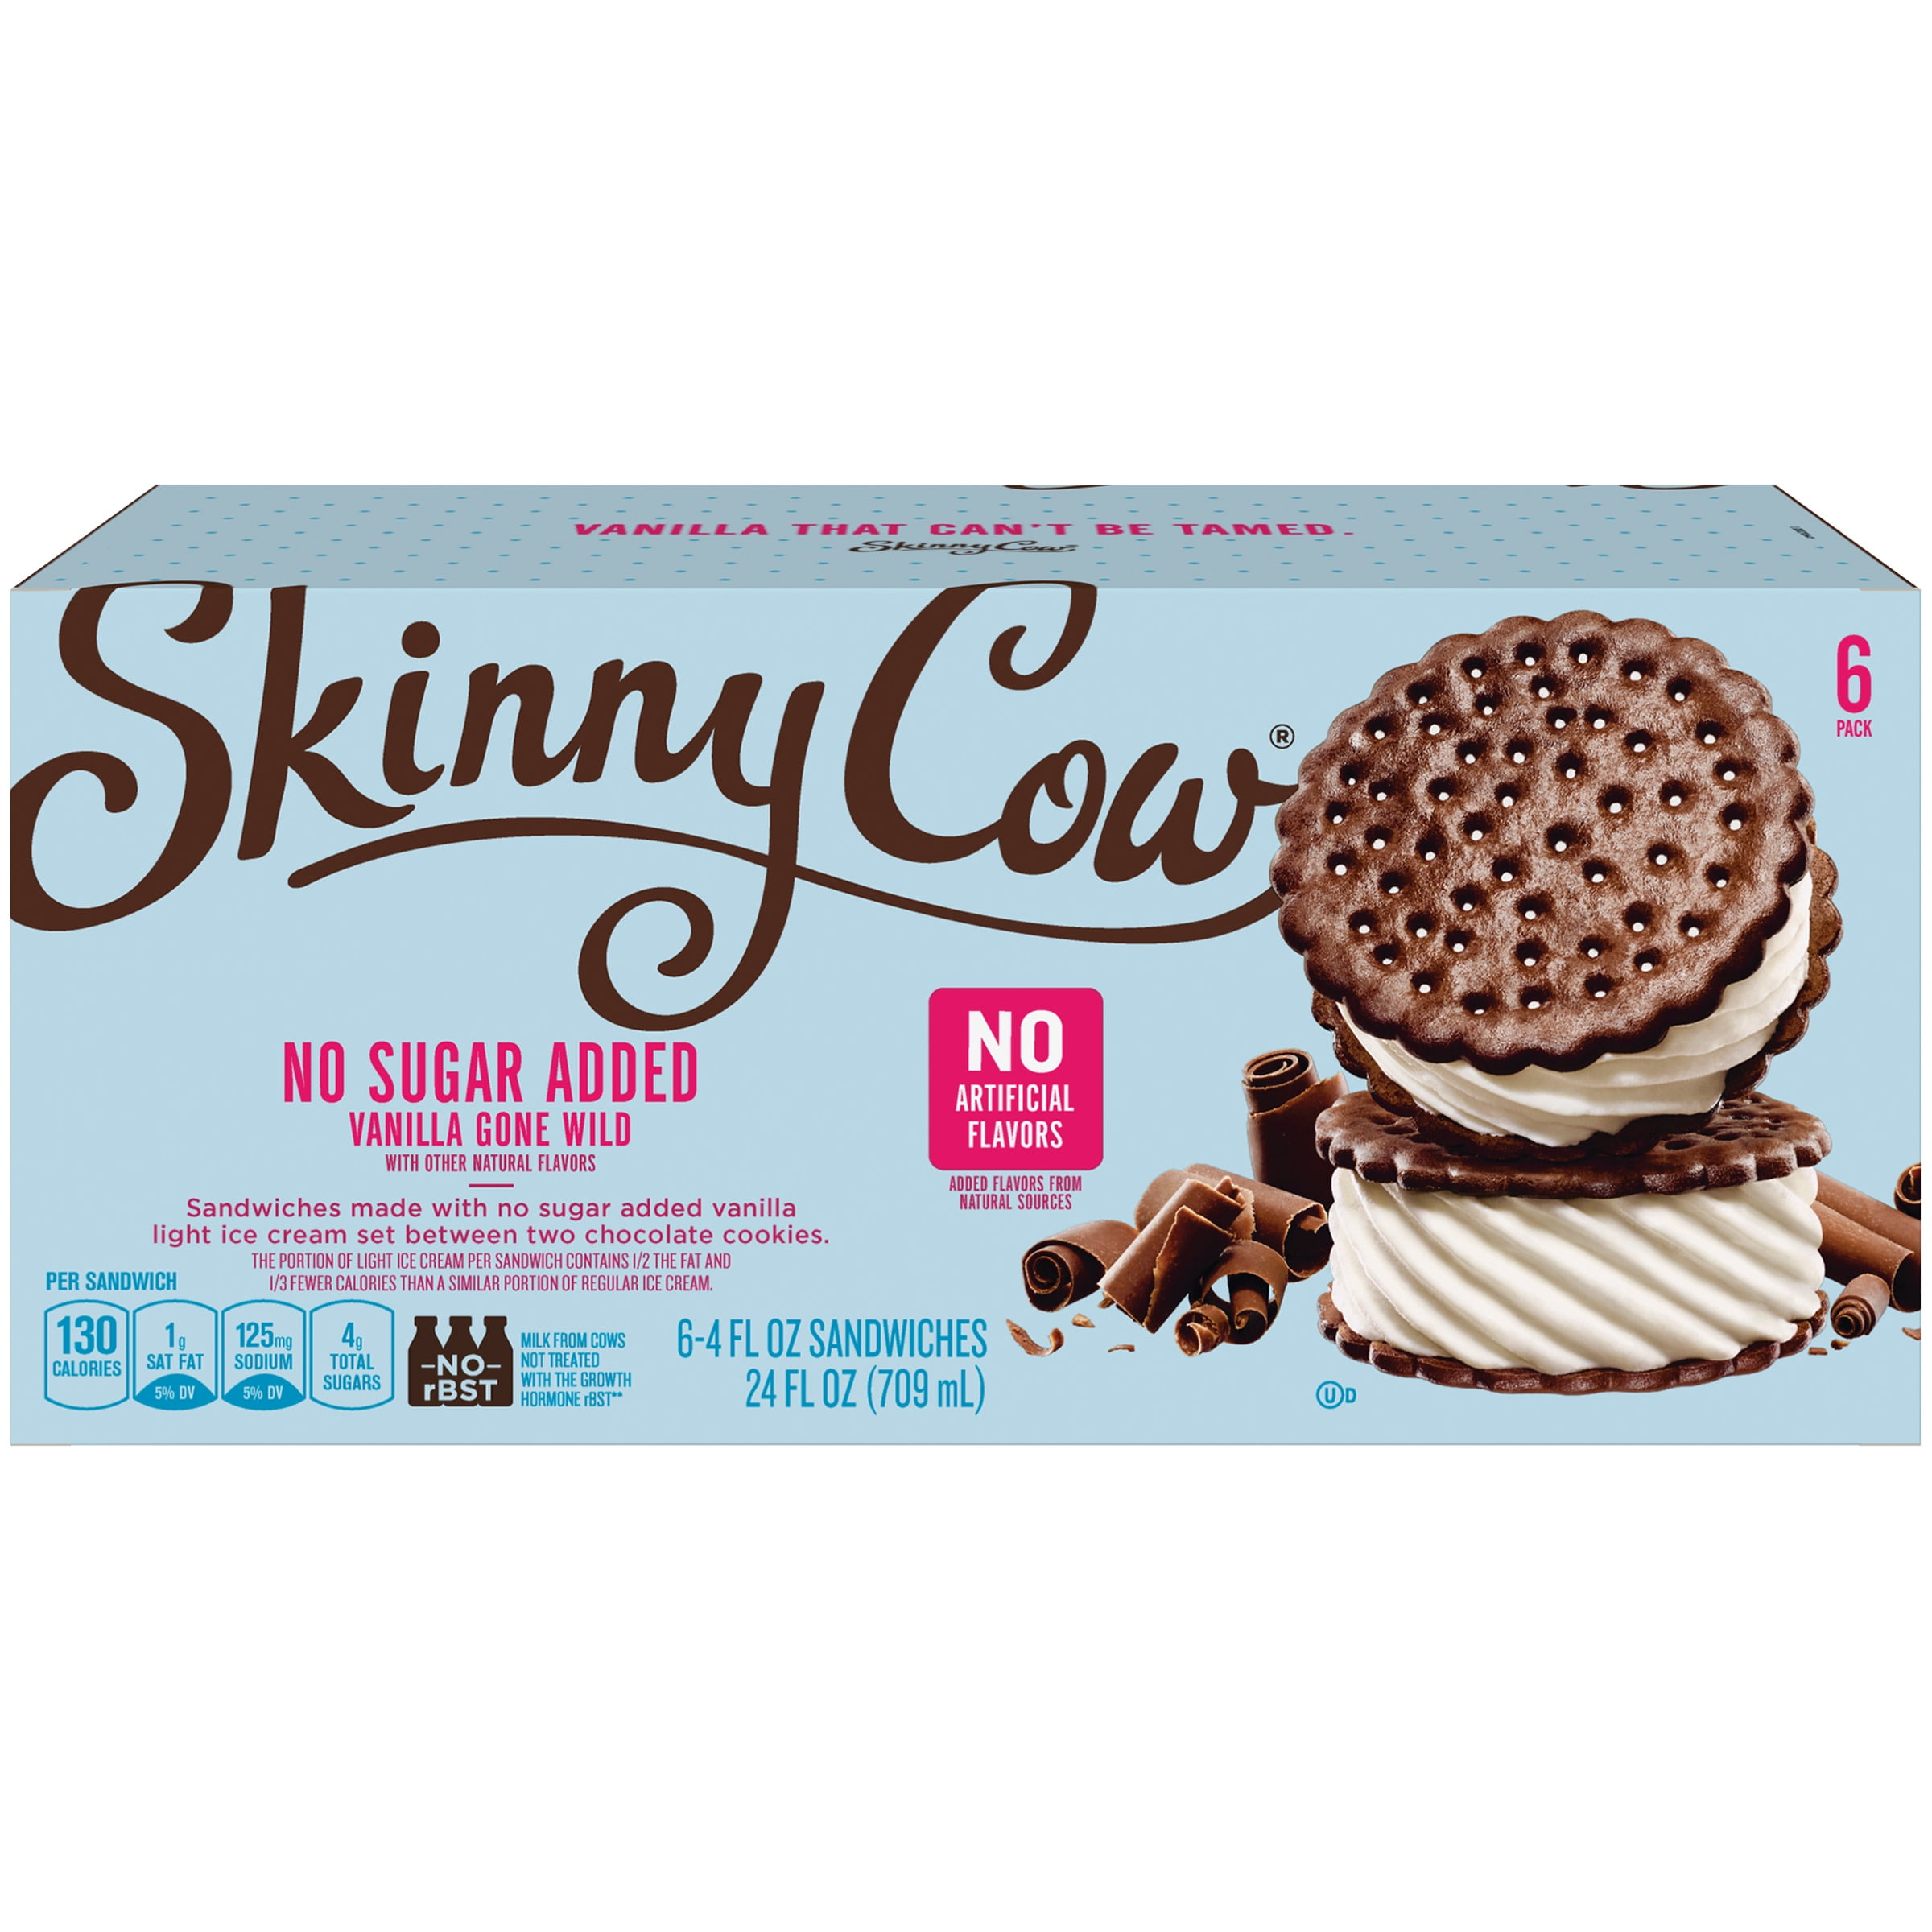 Skinny Food Co puts no sugar in its crumbly new Skinny Cookies